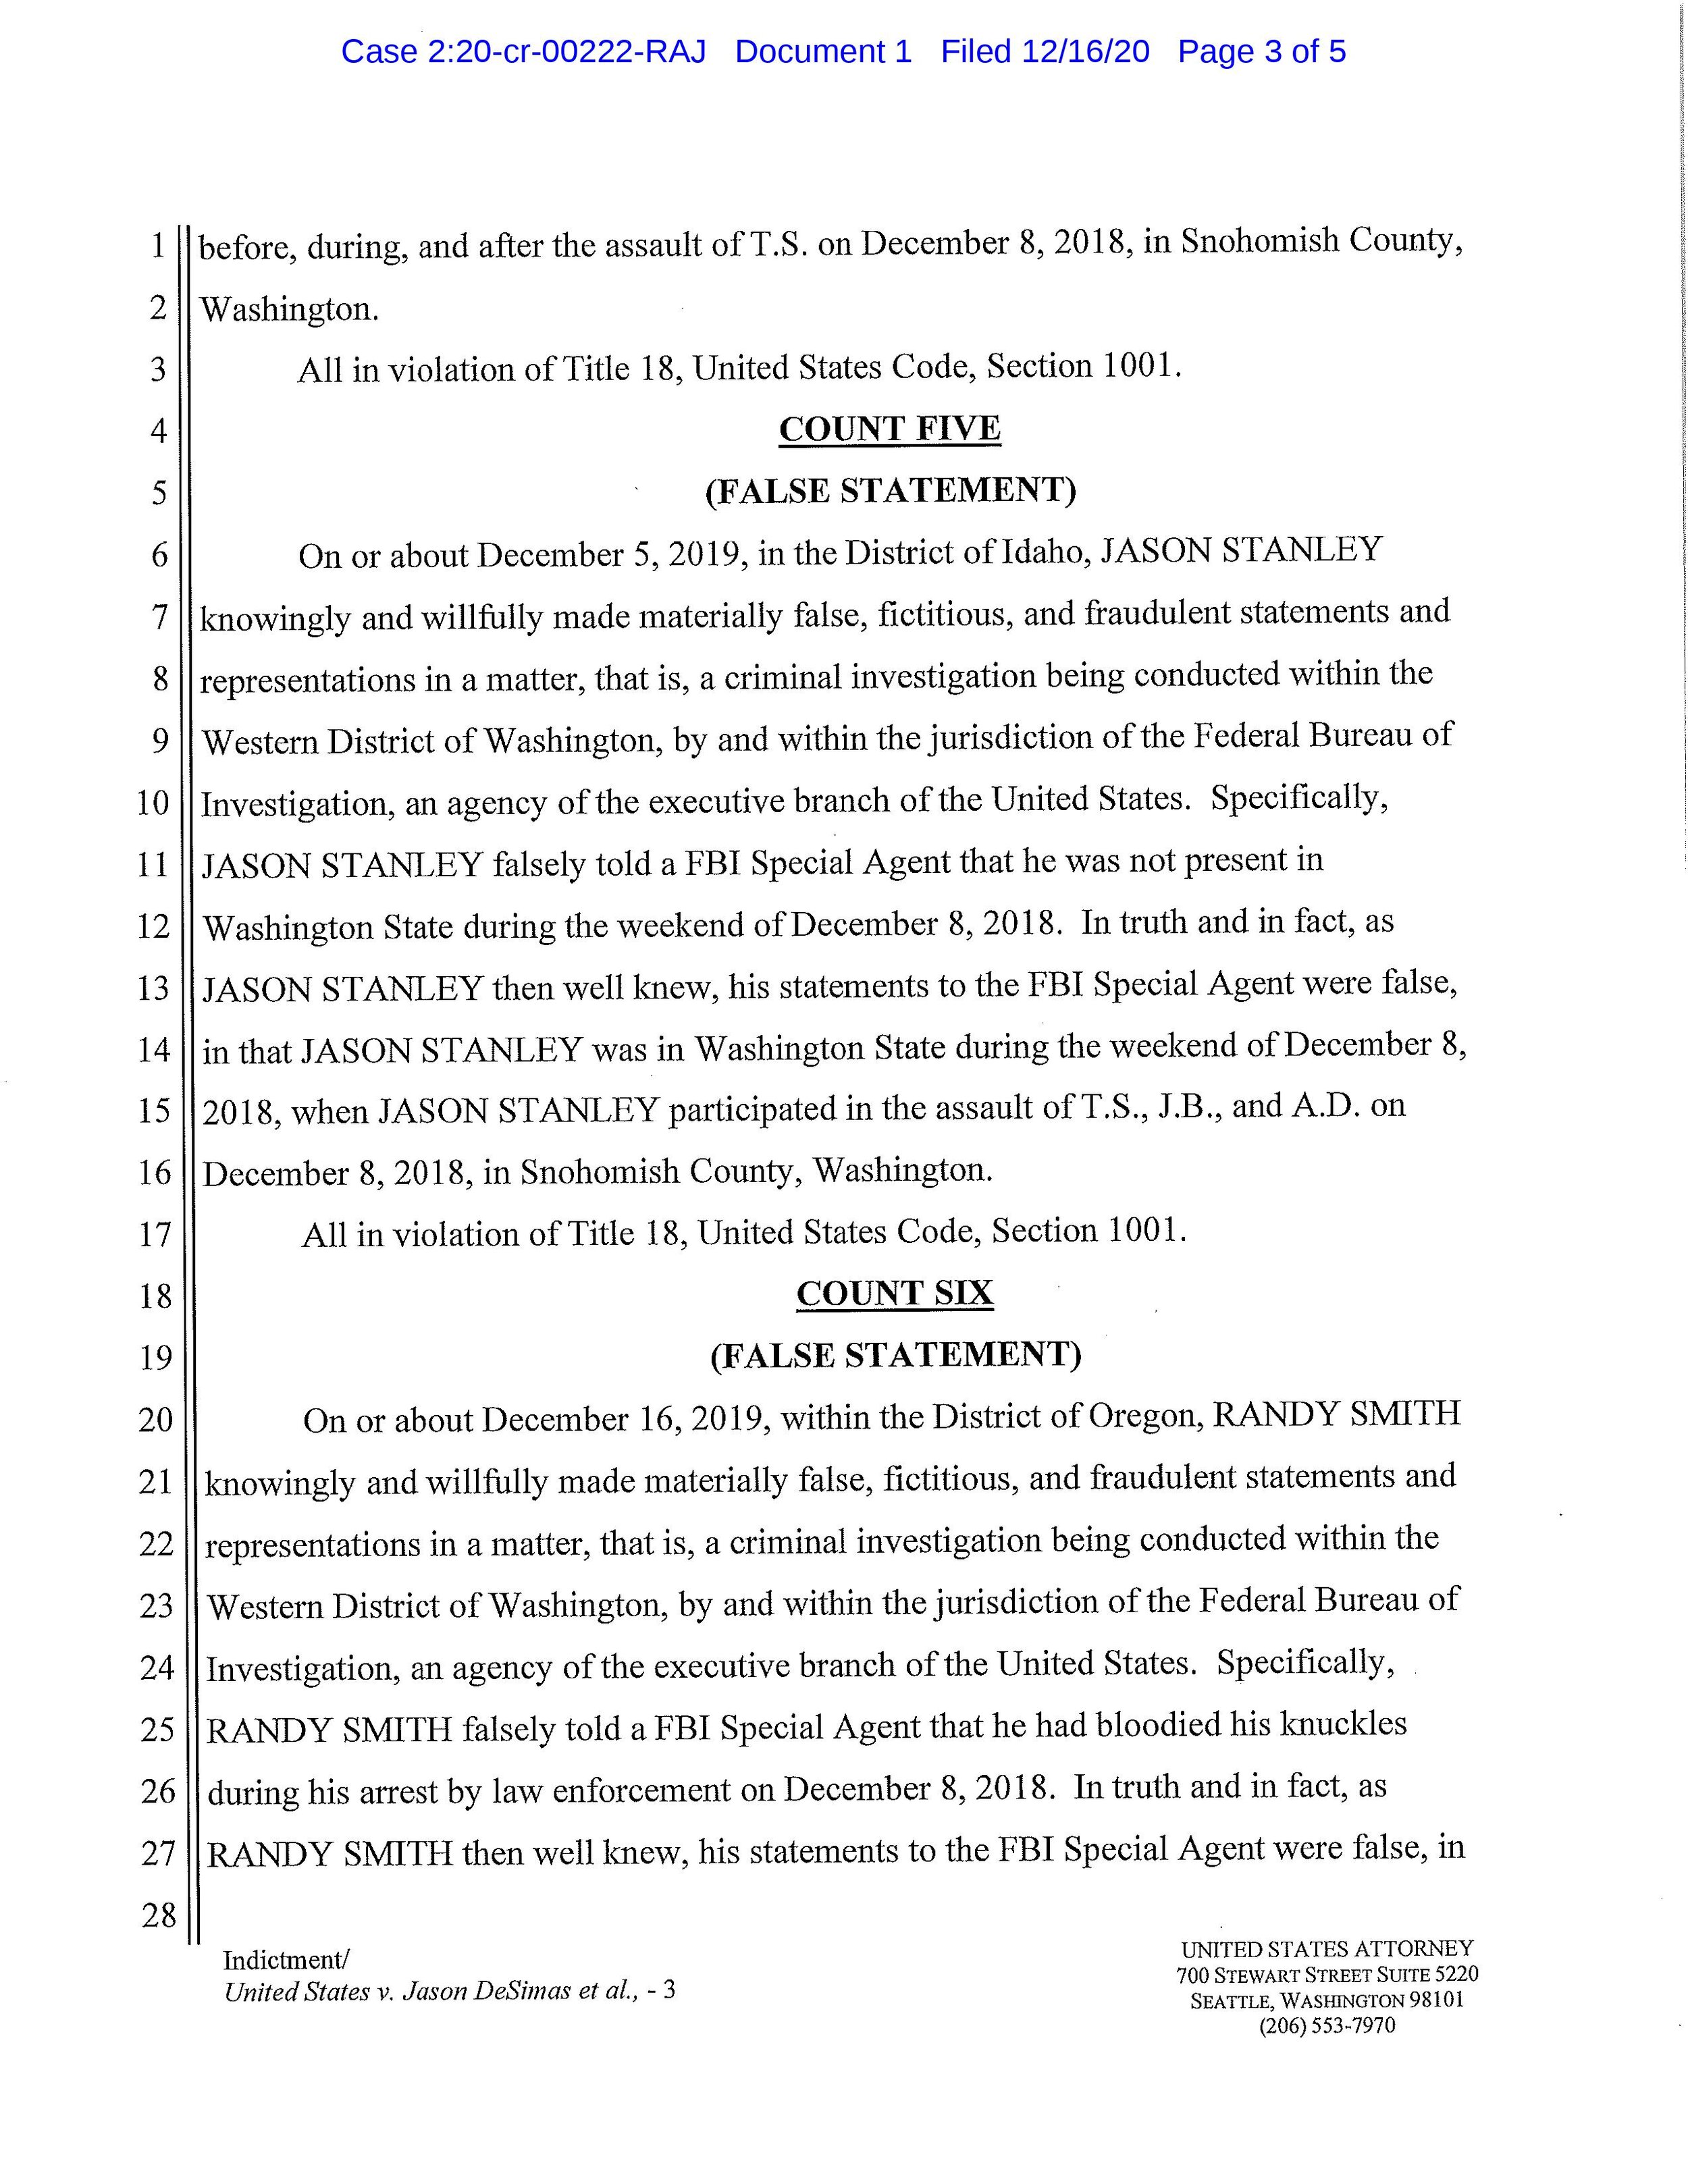 Indictment Page 3